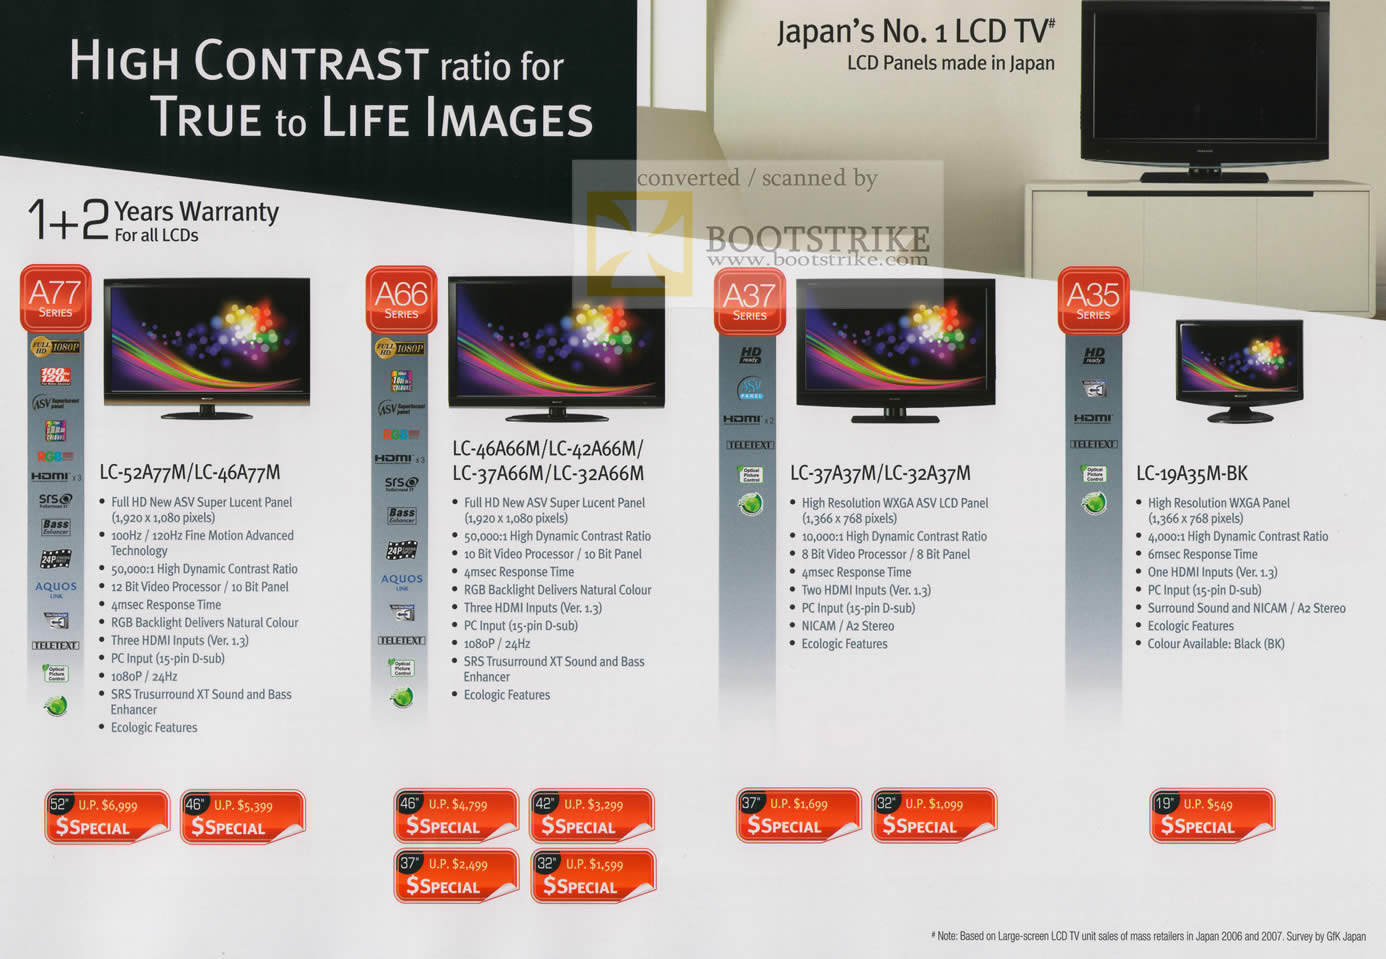 Sitex 2009 price list image brochure of Sharp LCD TV Aquos LC 52A77M 46A77M 46A66M 37A37M 19A35M